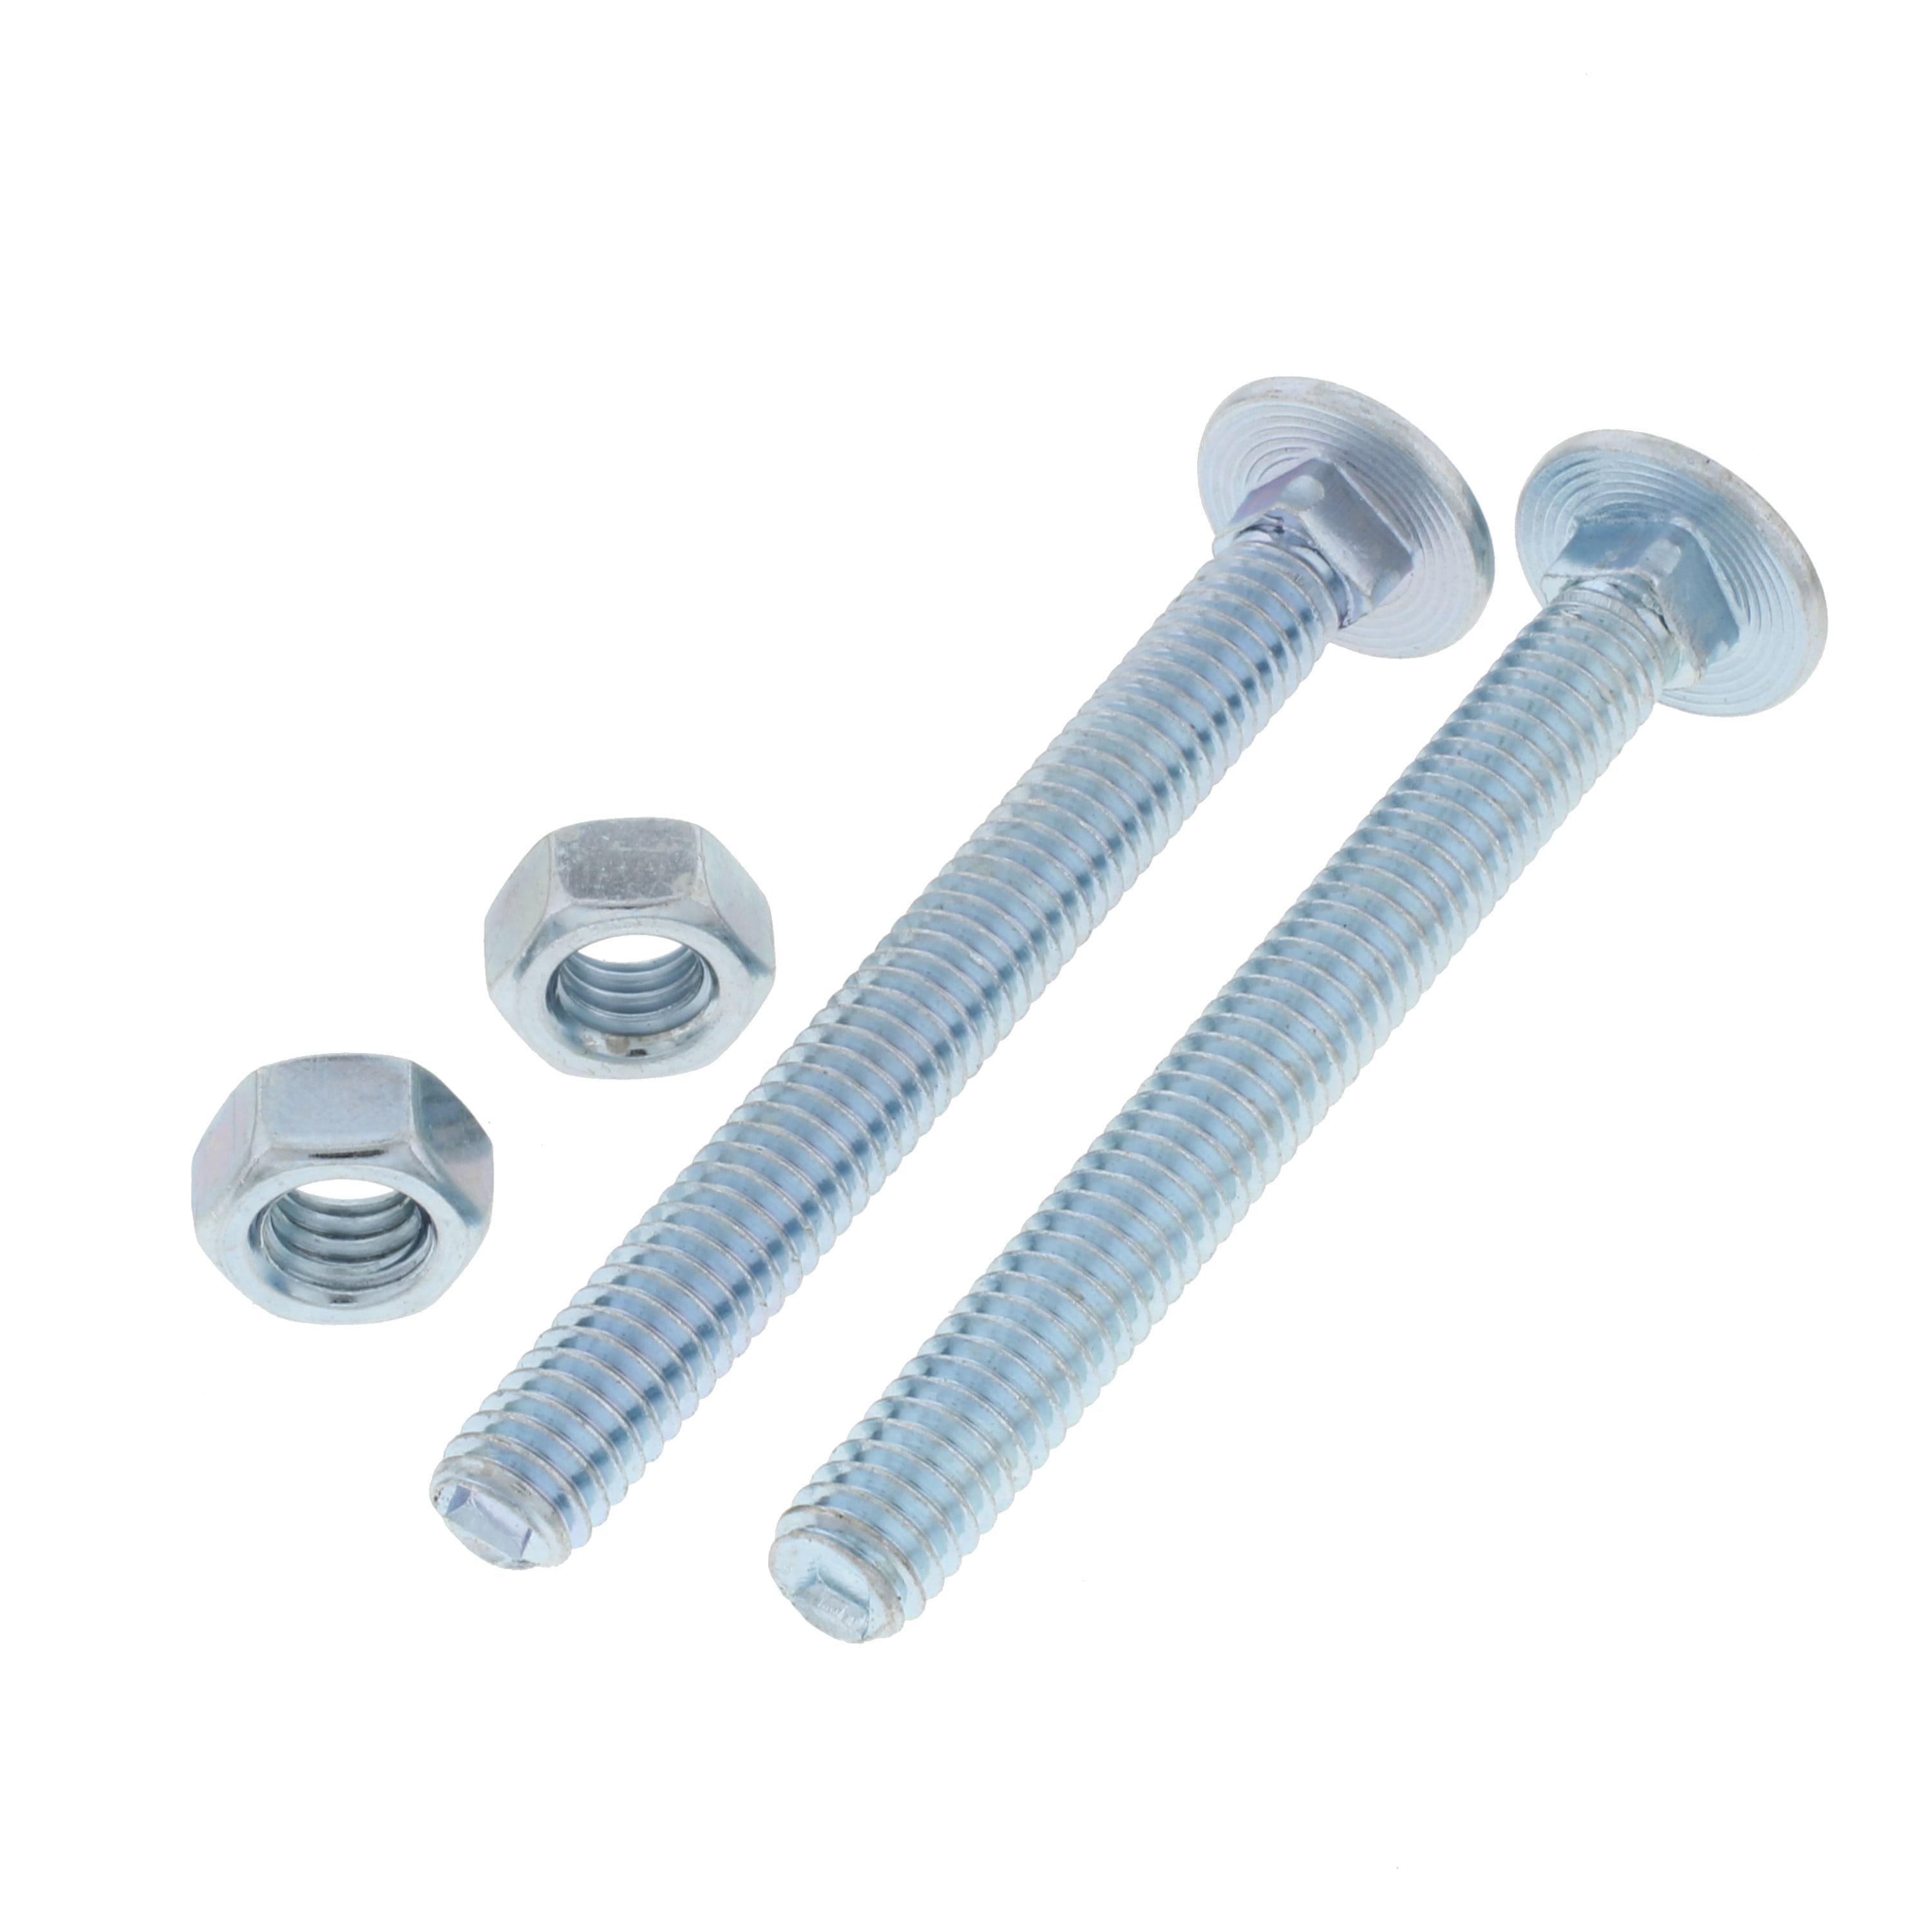 50 Good Holding Power in Different Materials Durable and Sturdy 5/16-18x3/4 Stainless Steel Carriage Bolts Coarse Thread Round Head Screw 